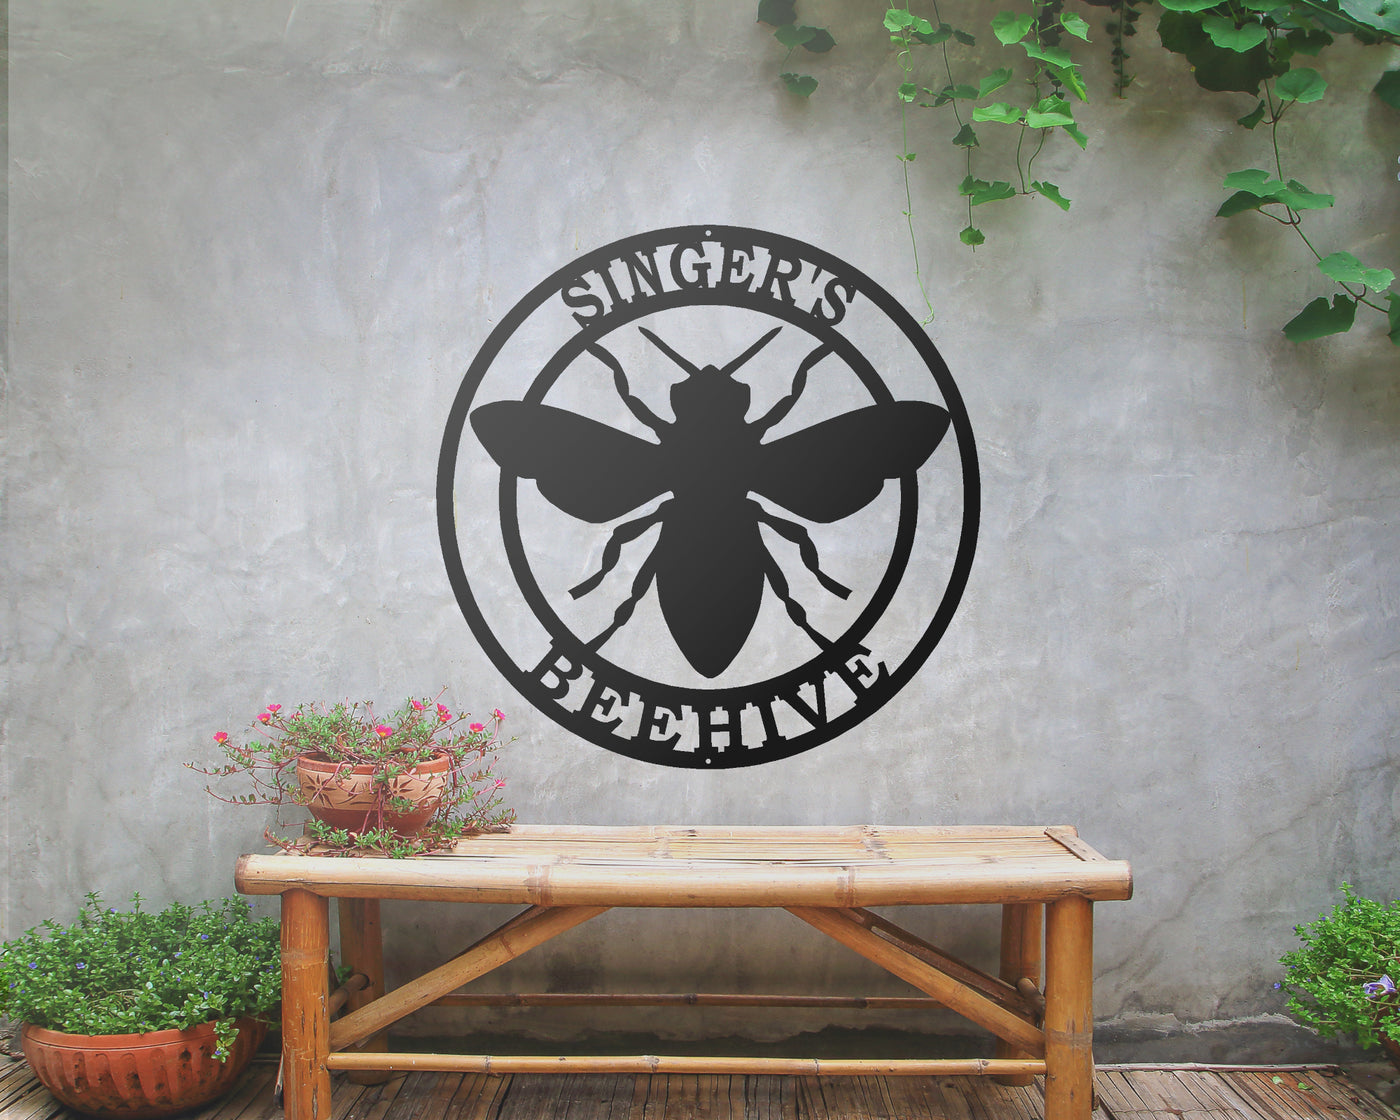 Personalized Honey Bee Metal Sign - Madison Iron and Wood - Personalized sign - metal outdoor decor - Steel deocrations - american made products - veteran owned business products - fencing decorations - fencing supplies - custom wall decorations - personalized wall signs - steel - decorative post caps - steel post caps - metal post caps - brackets - structural brackets - home improvement - easter - easter decorations - easter gift - easter yard decor